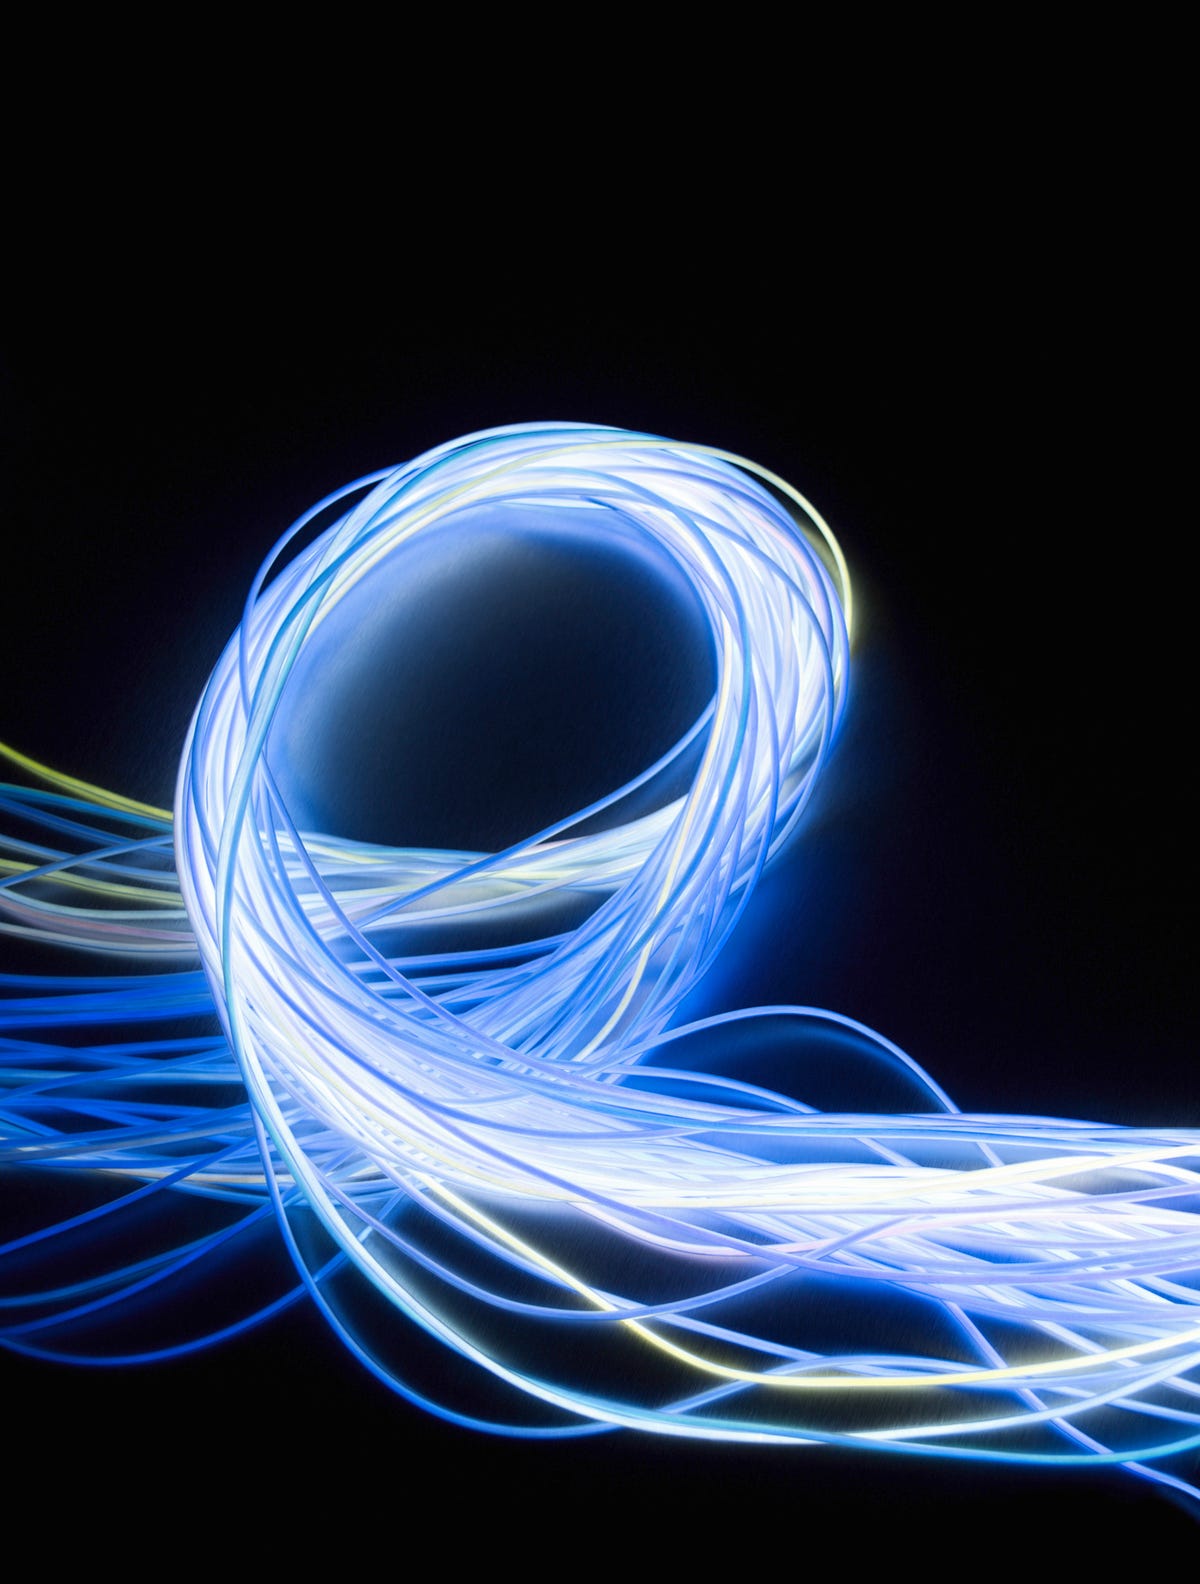 A curly bundle of fiber optic wires against a black background